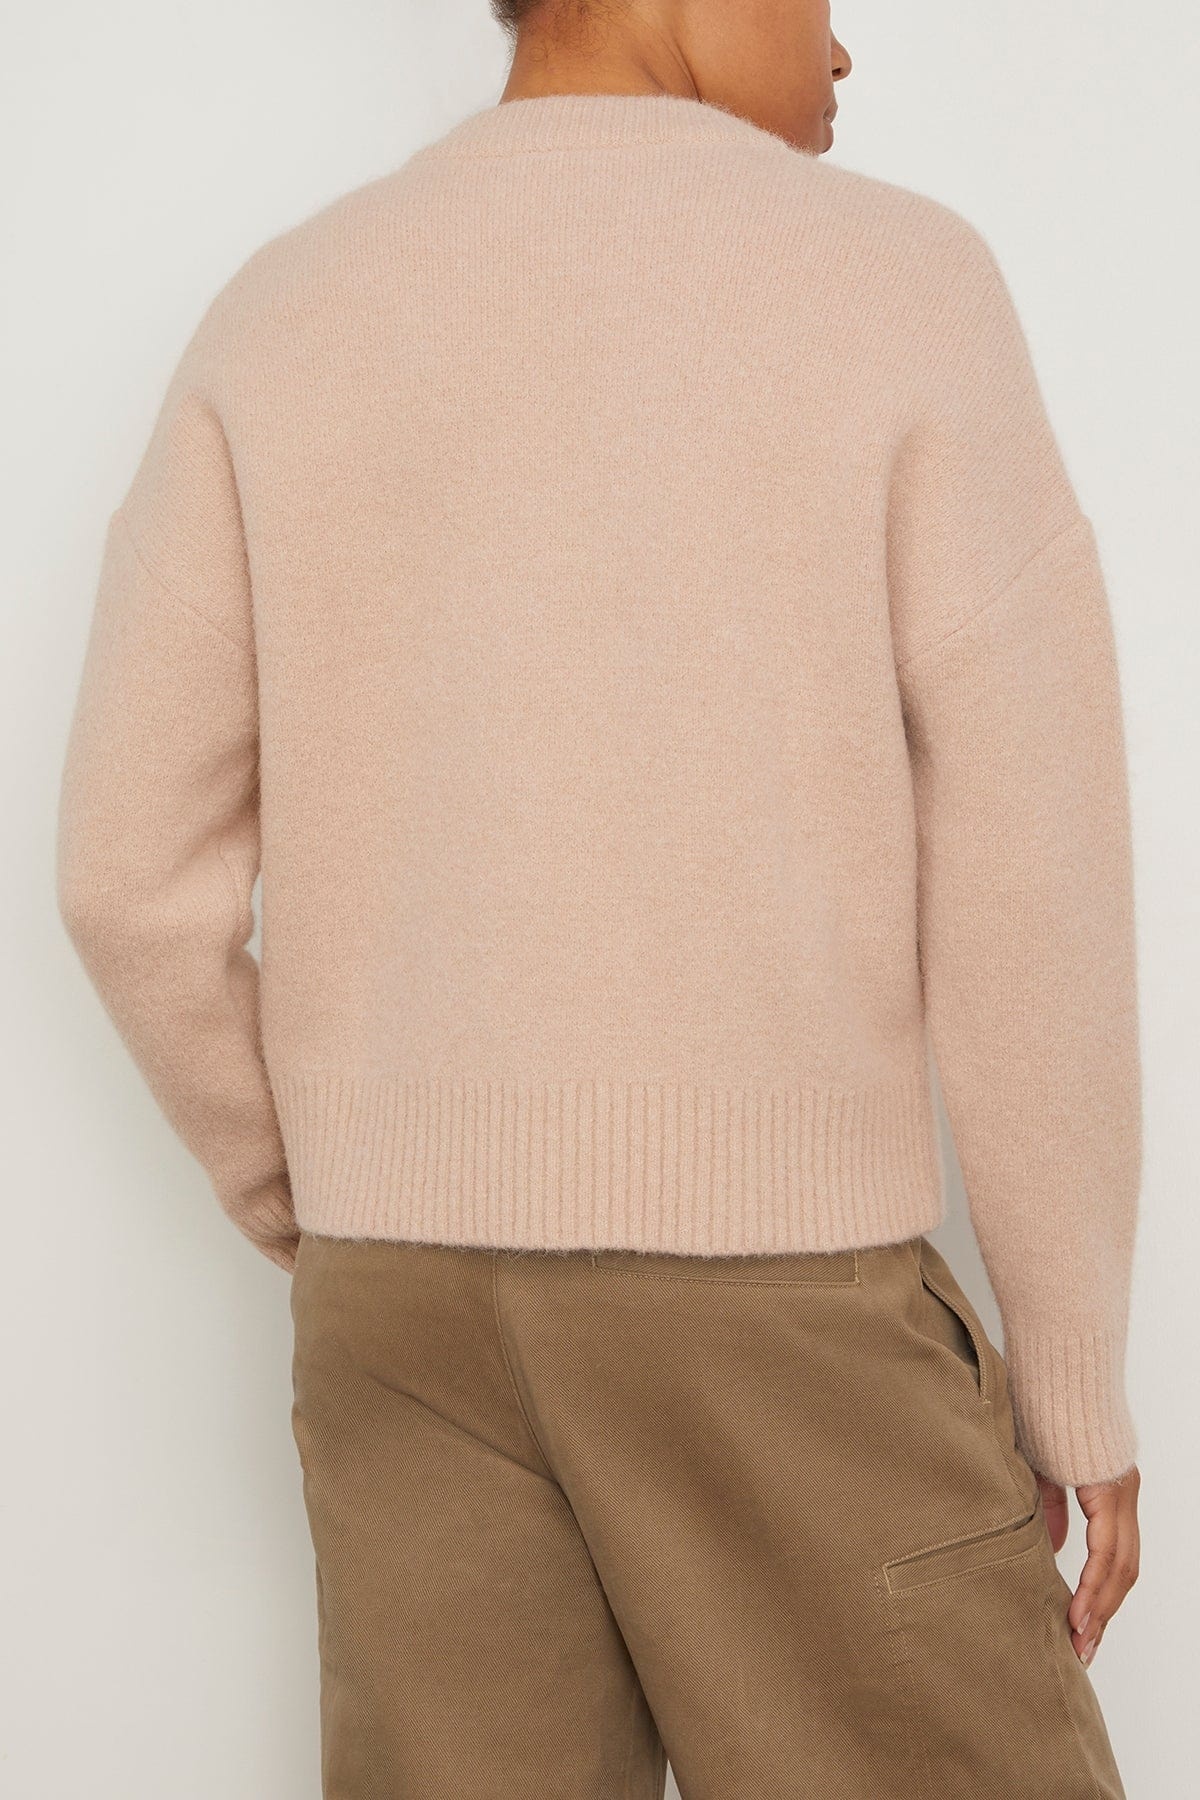 Off White ADC Cardigan in Powder Pink/Ivory - 4